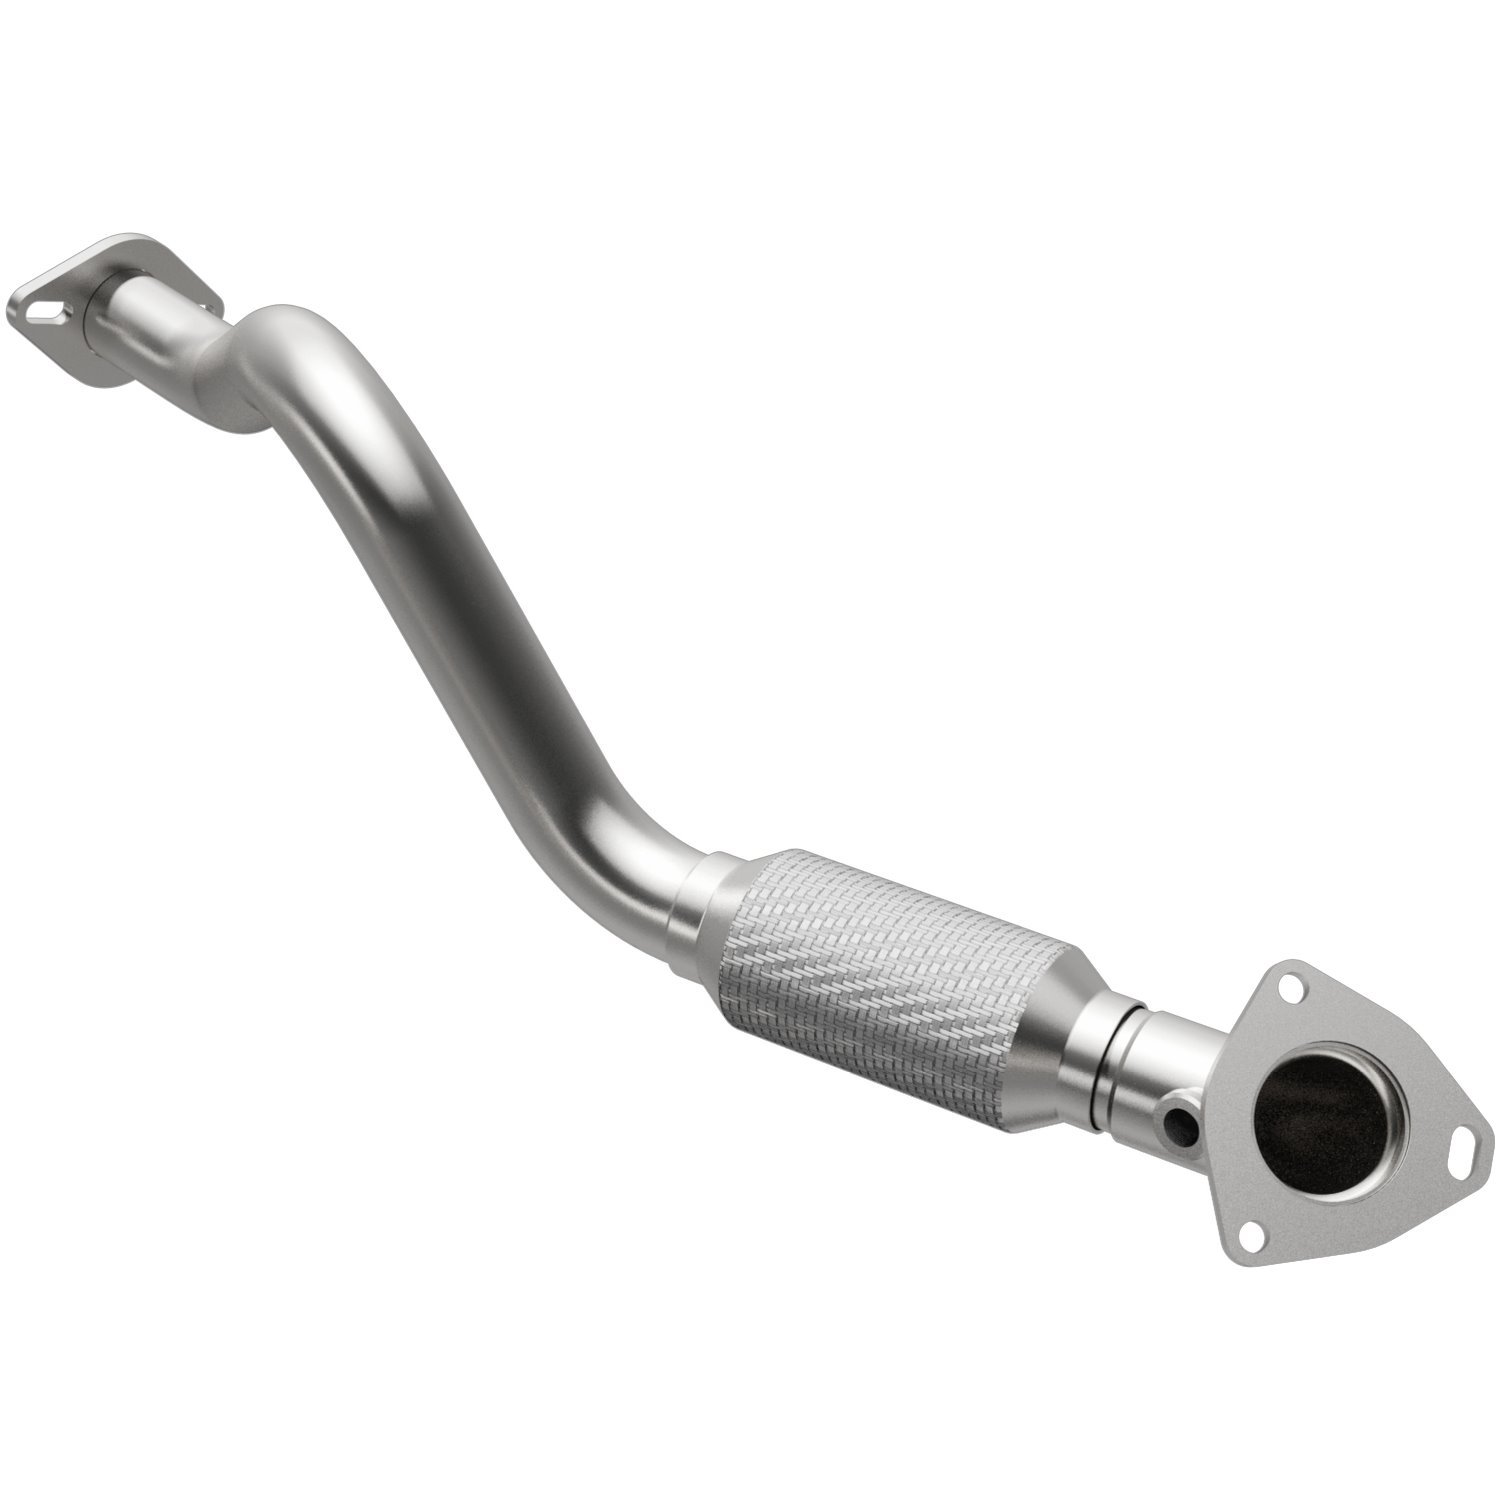 Direct-Fit Exhaust Intermediate Pipe, 2009-2011 Chevy Aveo/Aveo5 G3 1.6L